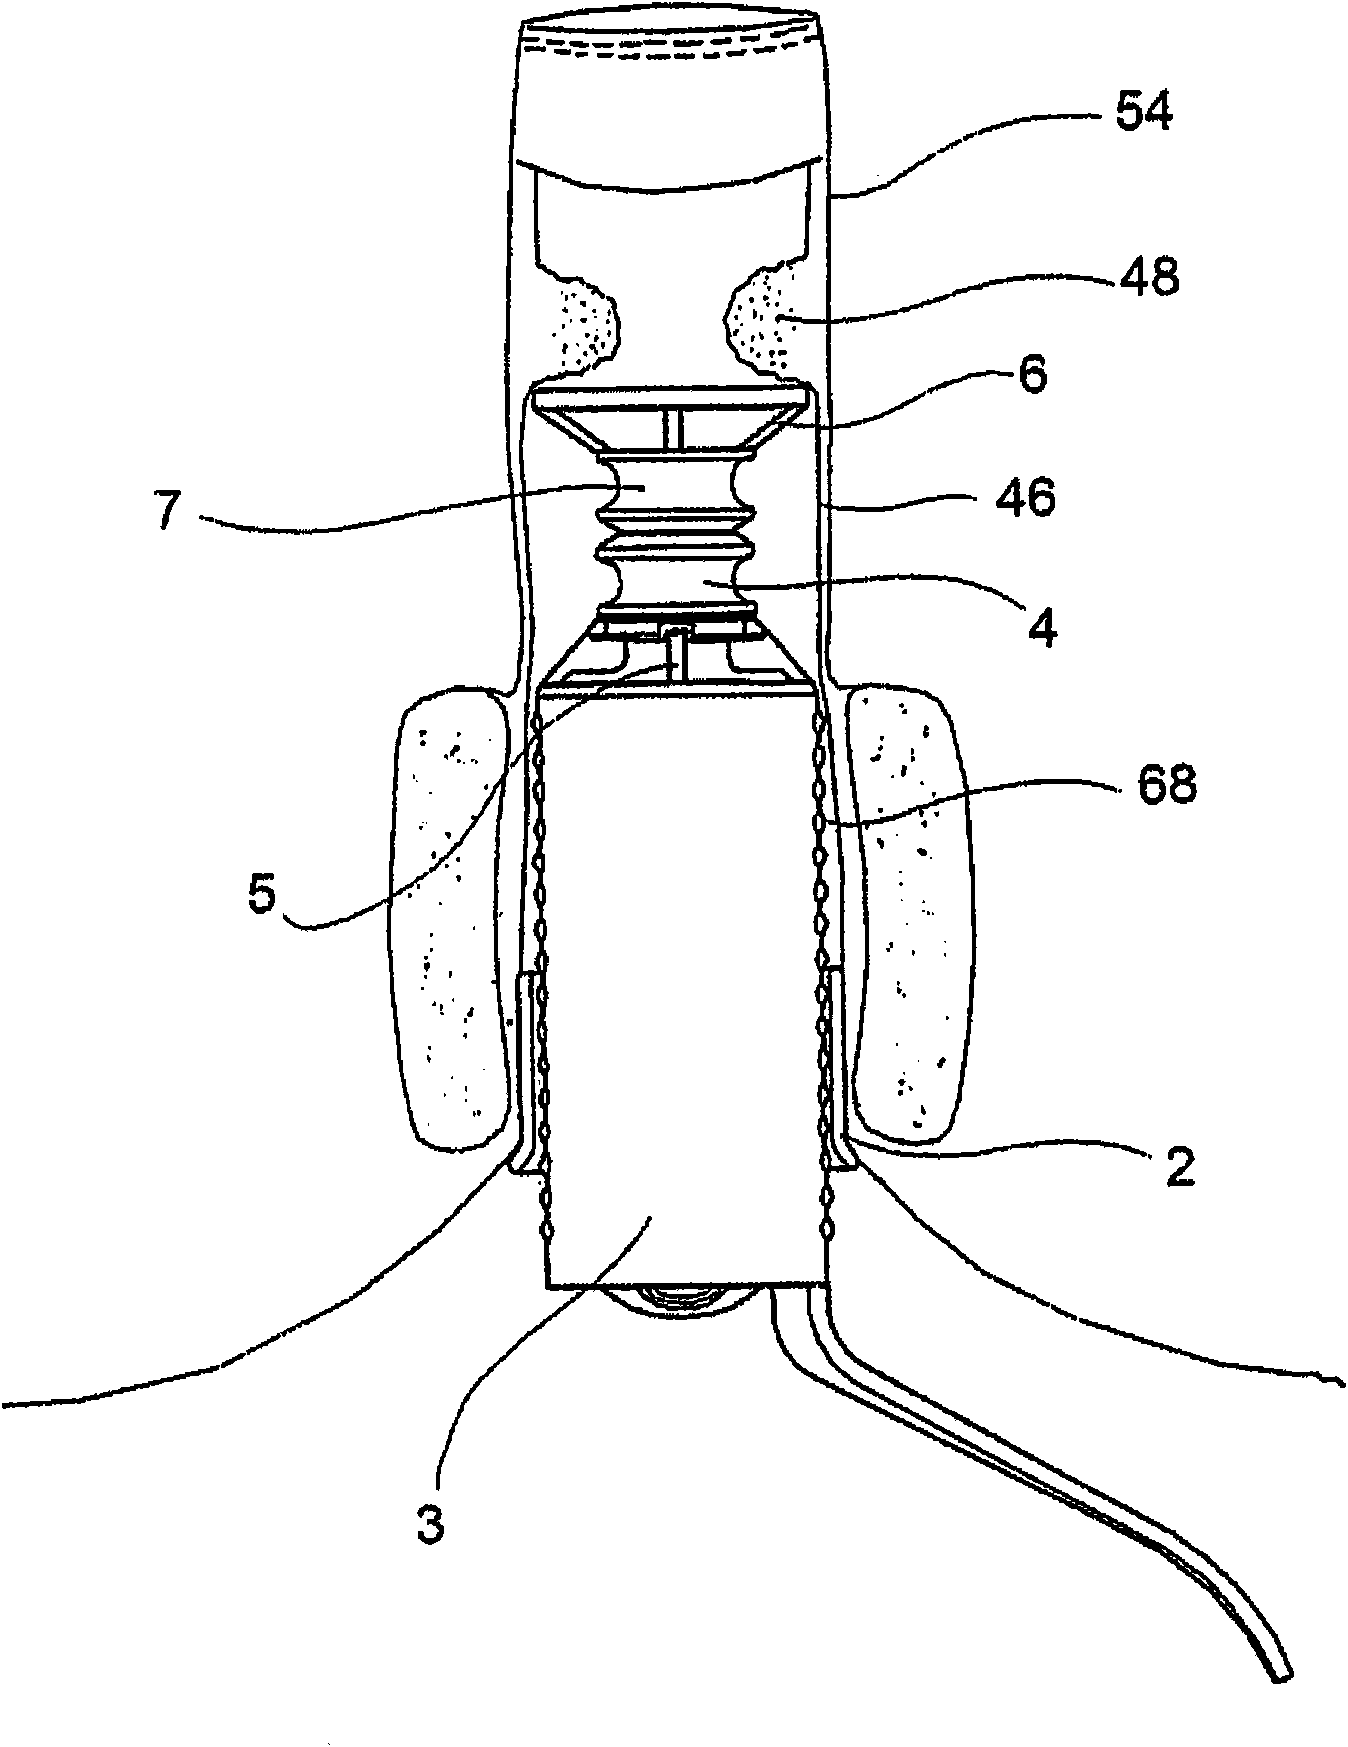 A rectal stump closure device for rectal resection